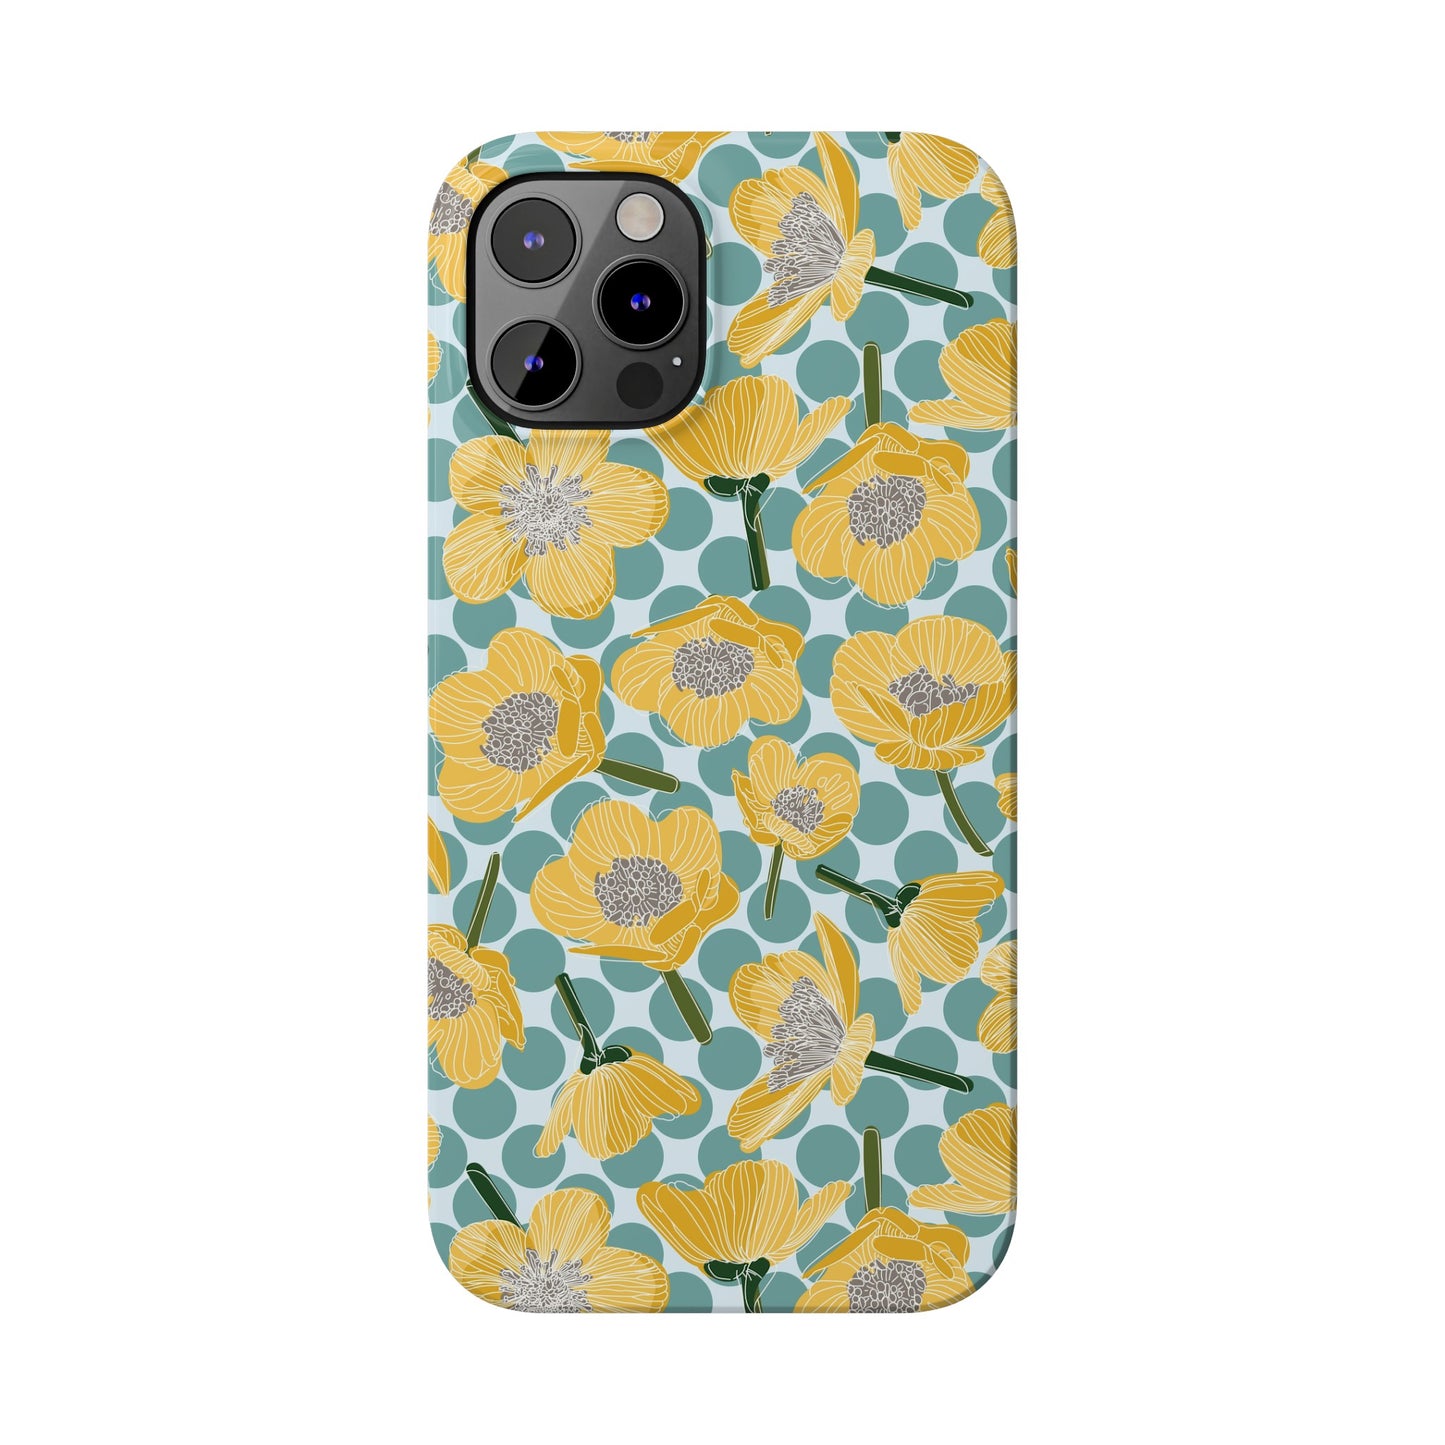 Buttercups and Polka Dots Slim Phone Cases